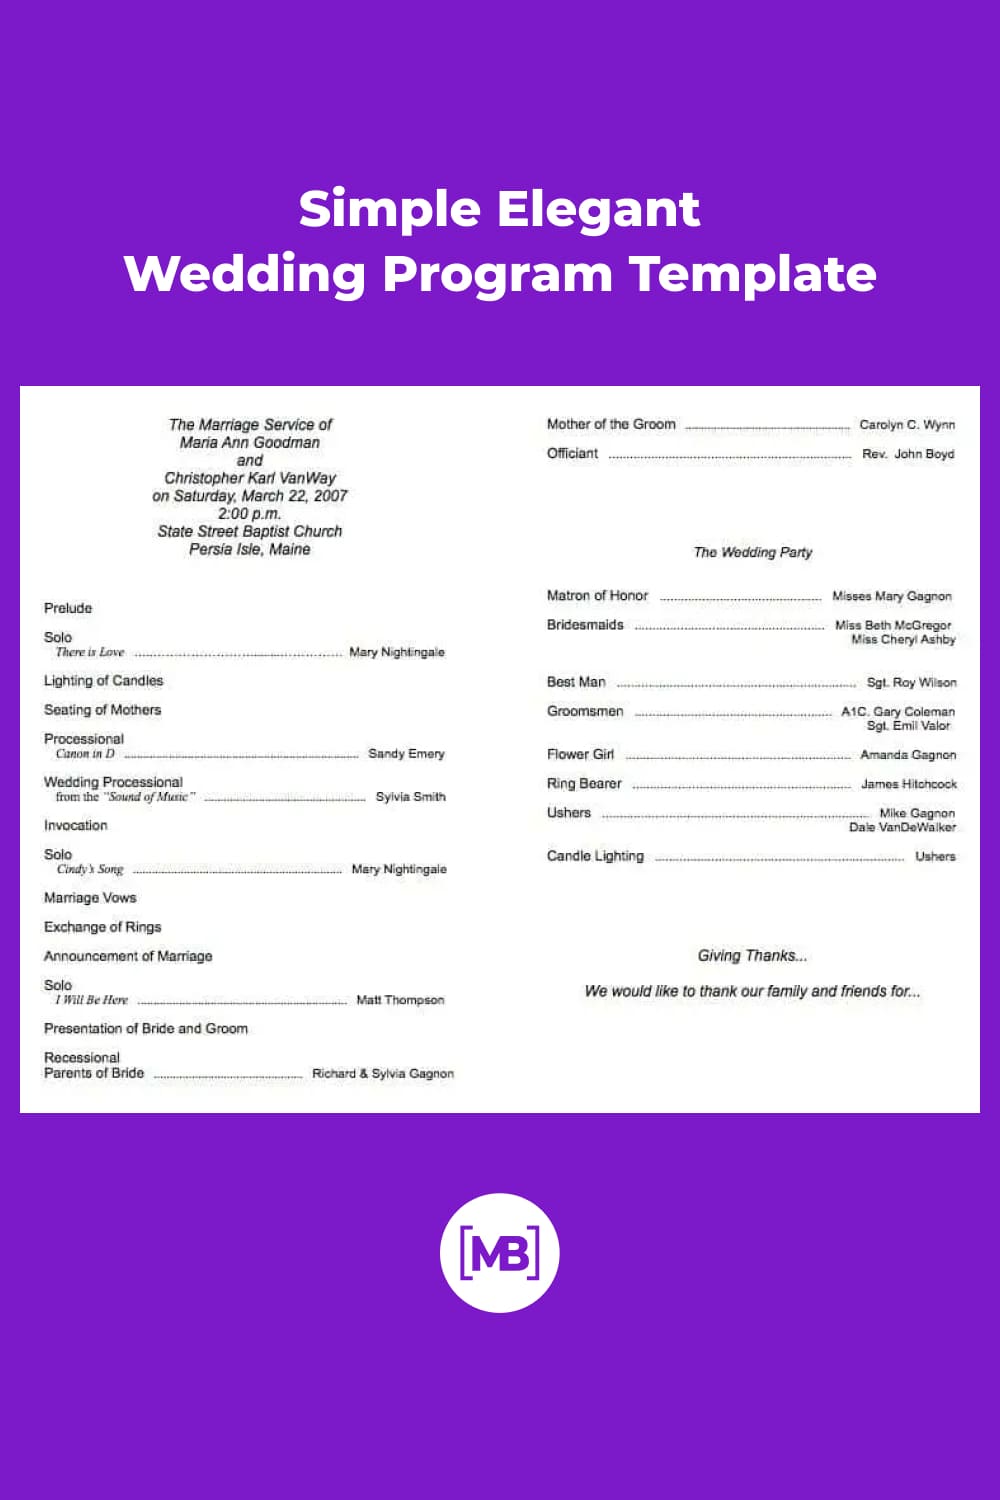 Here is a simple elegant wedding program template for your big day.